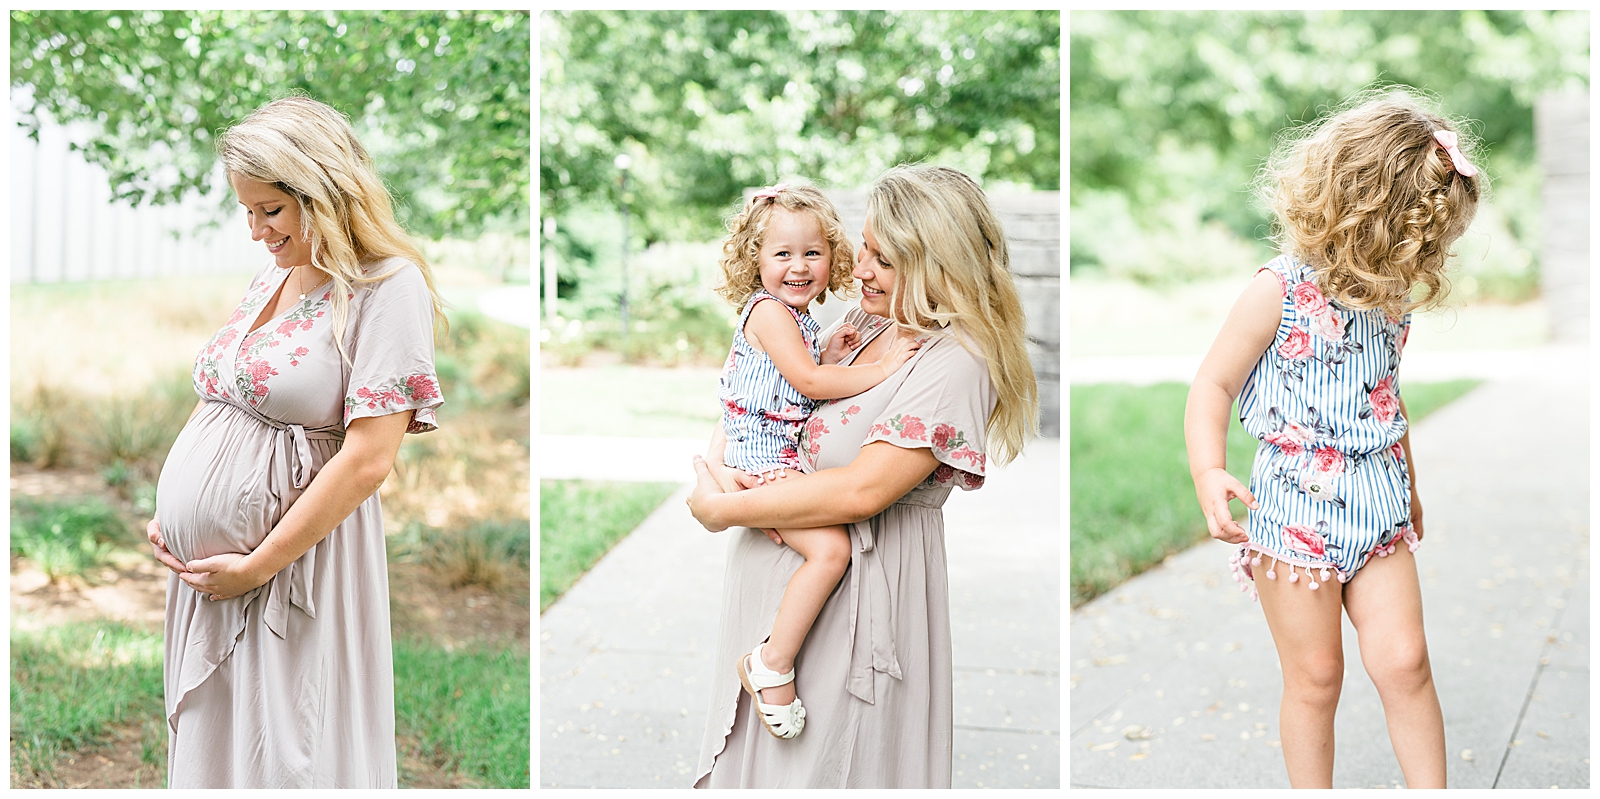 Beautiful Family Maternity Photos with Toddler